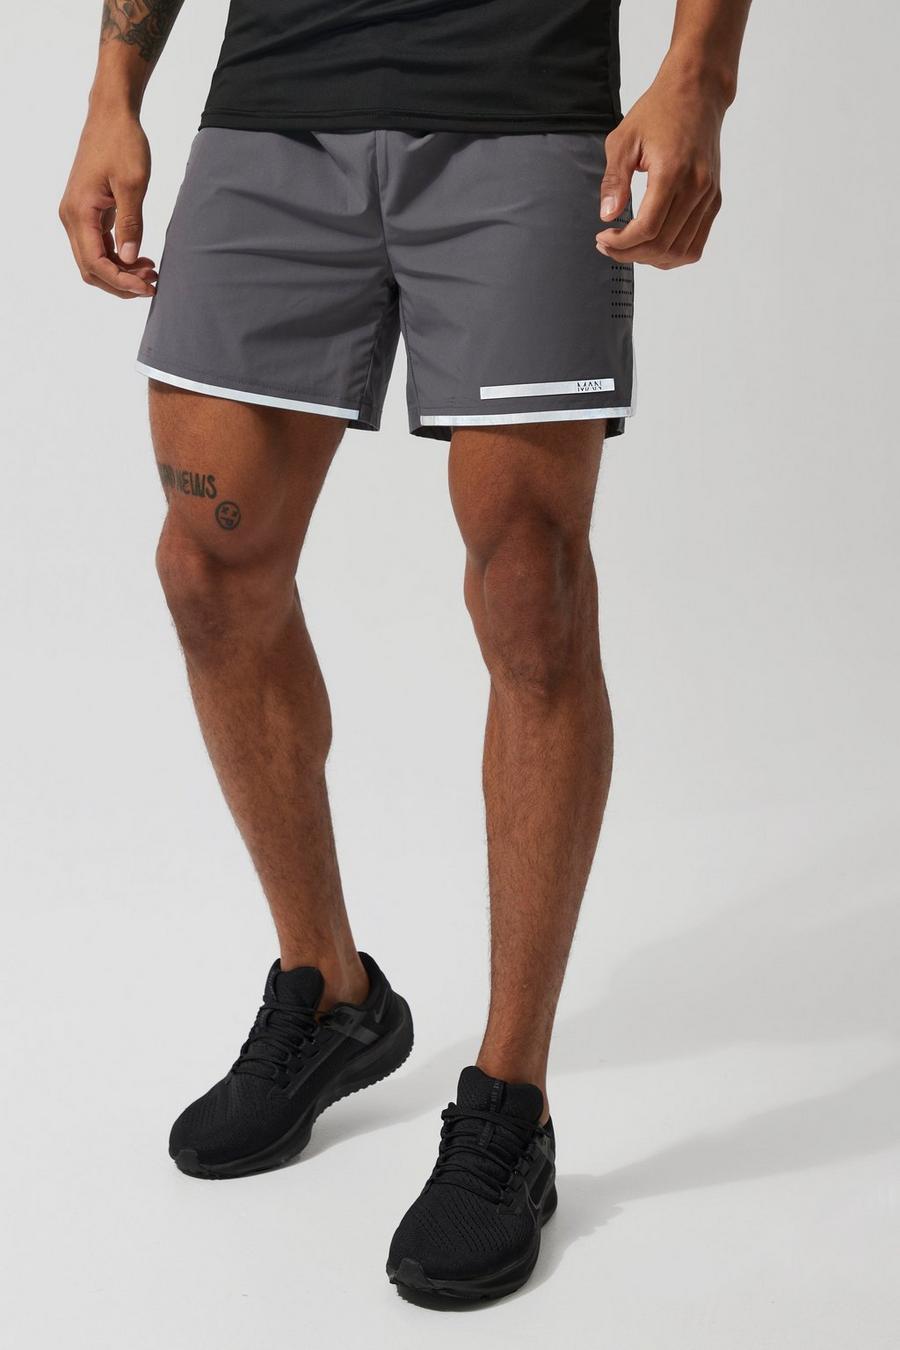 Man Active 5 Inch Performance Shorts, Charcoal gris